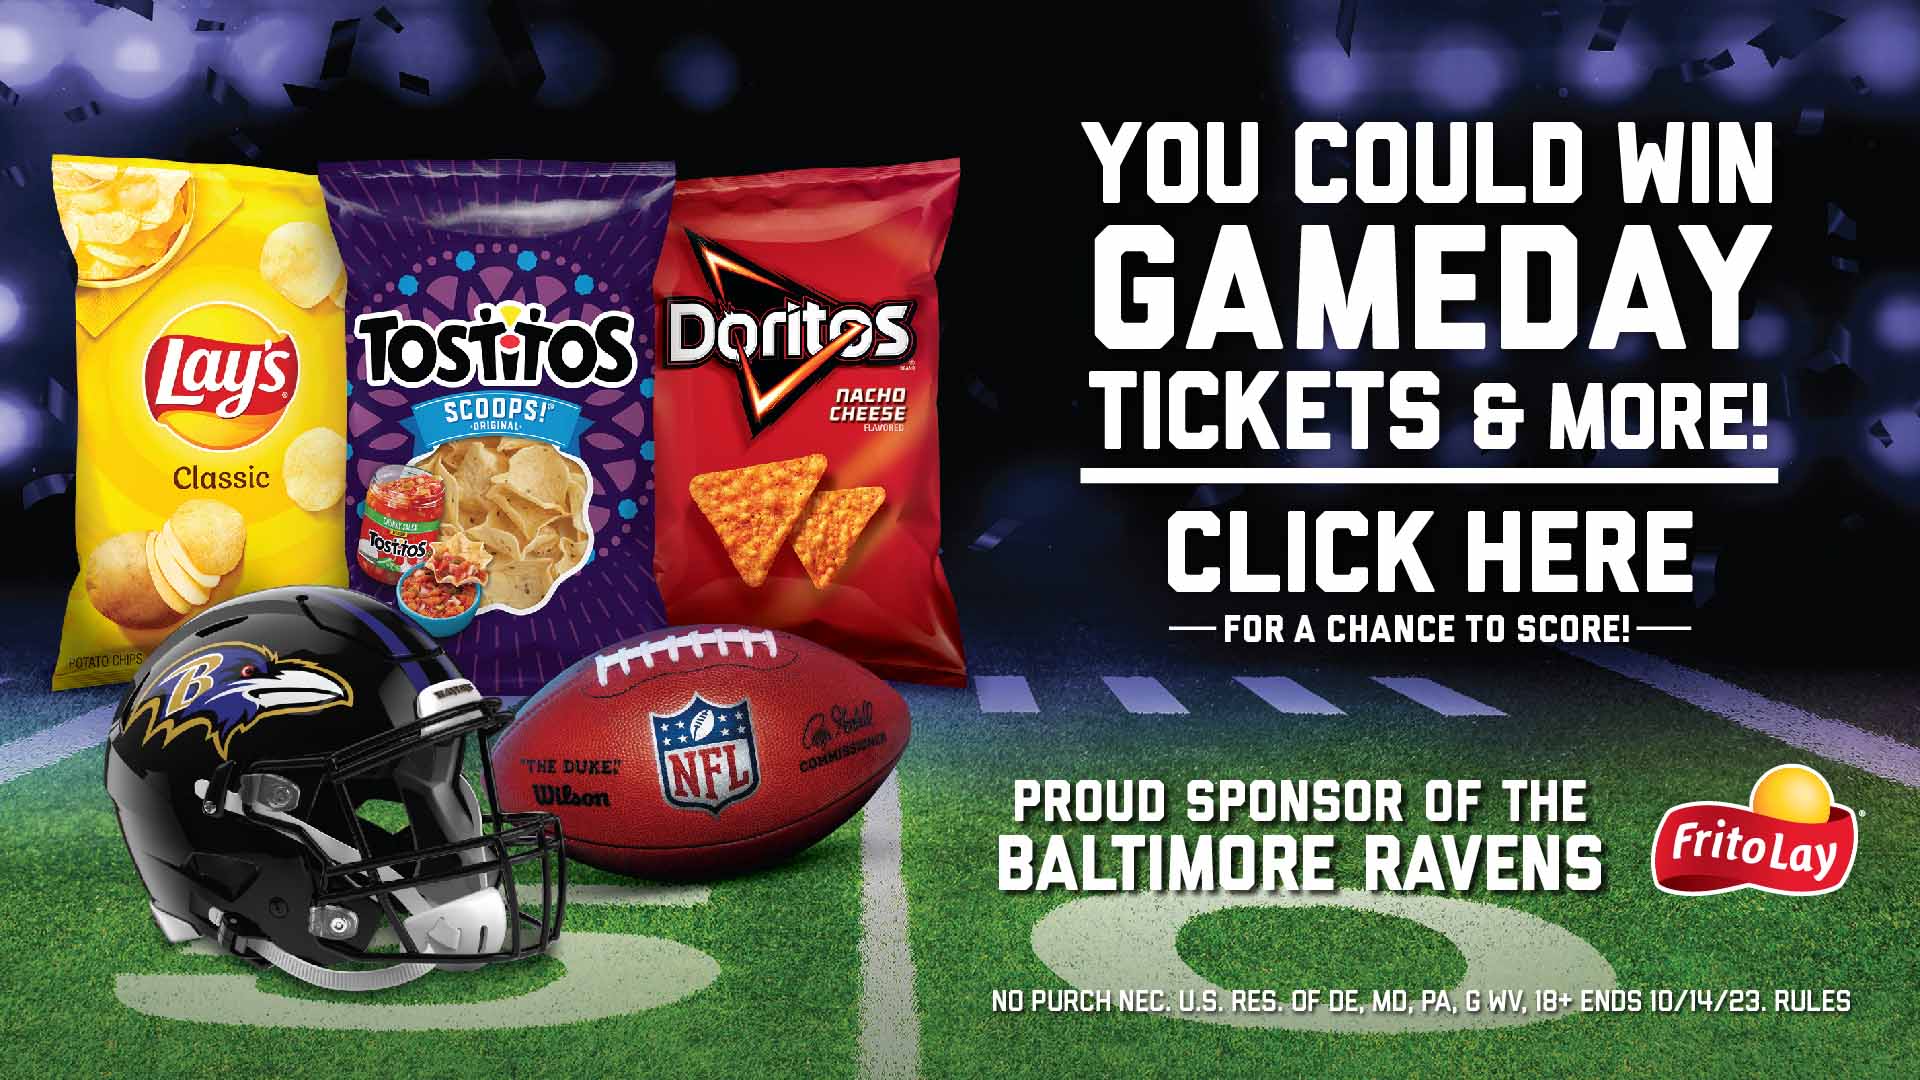 The Big Game 2023 Sweepstakes: Win Free Tickets To Super Bowl 2023